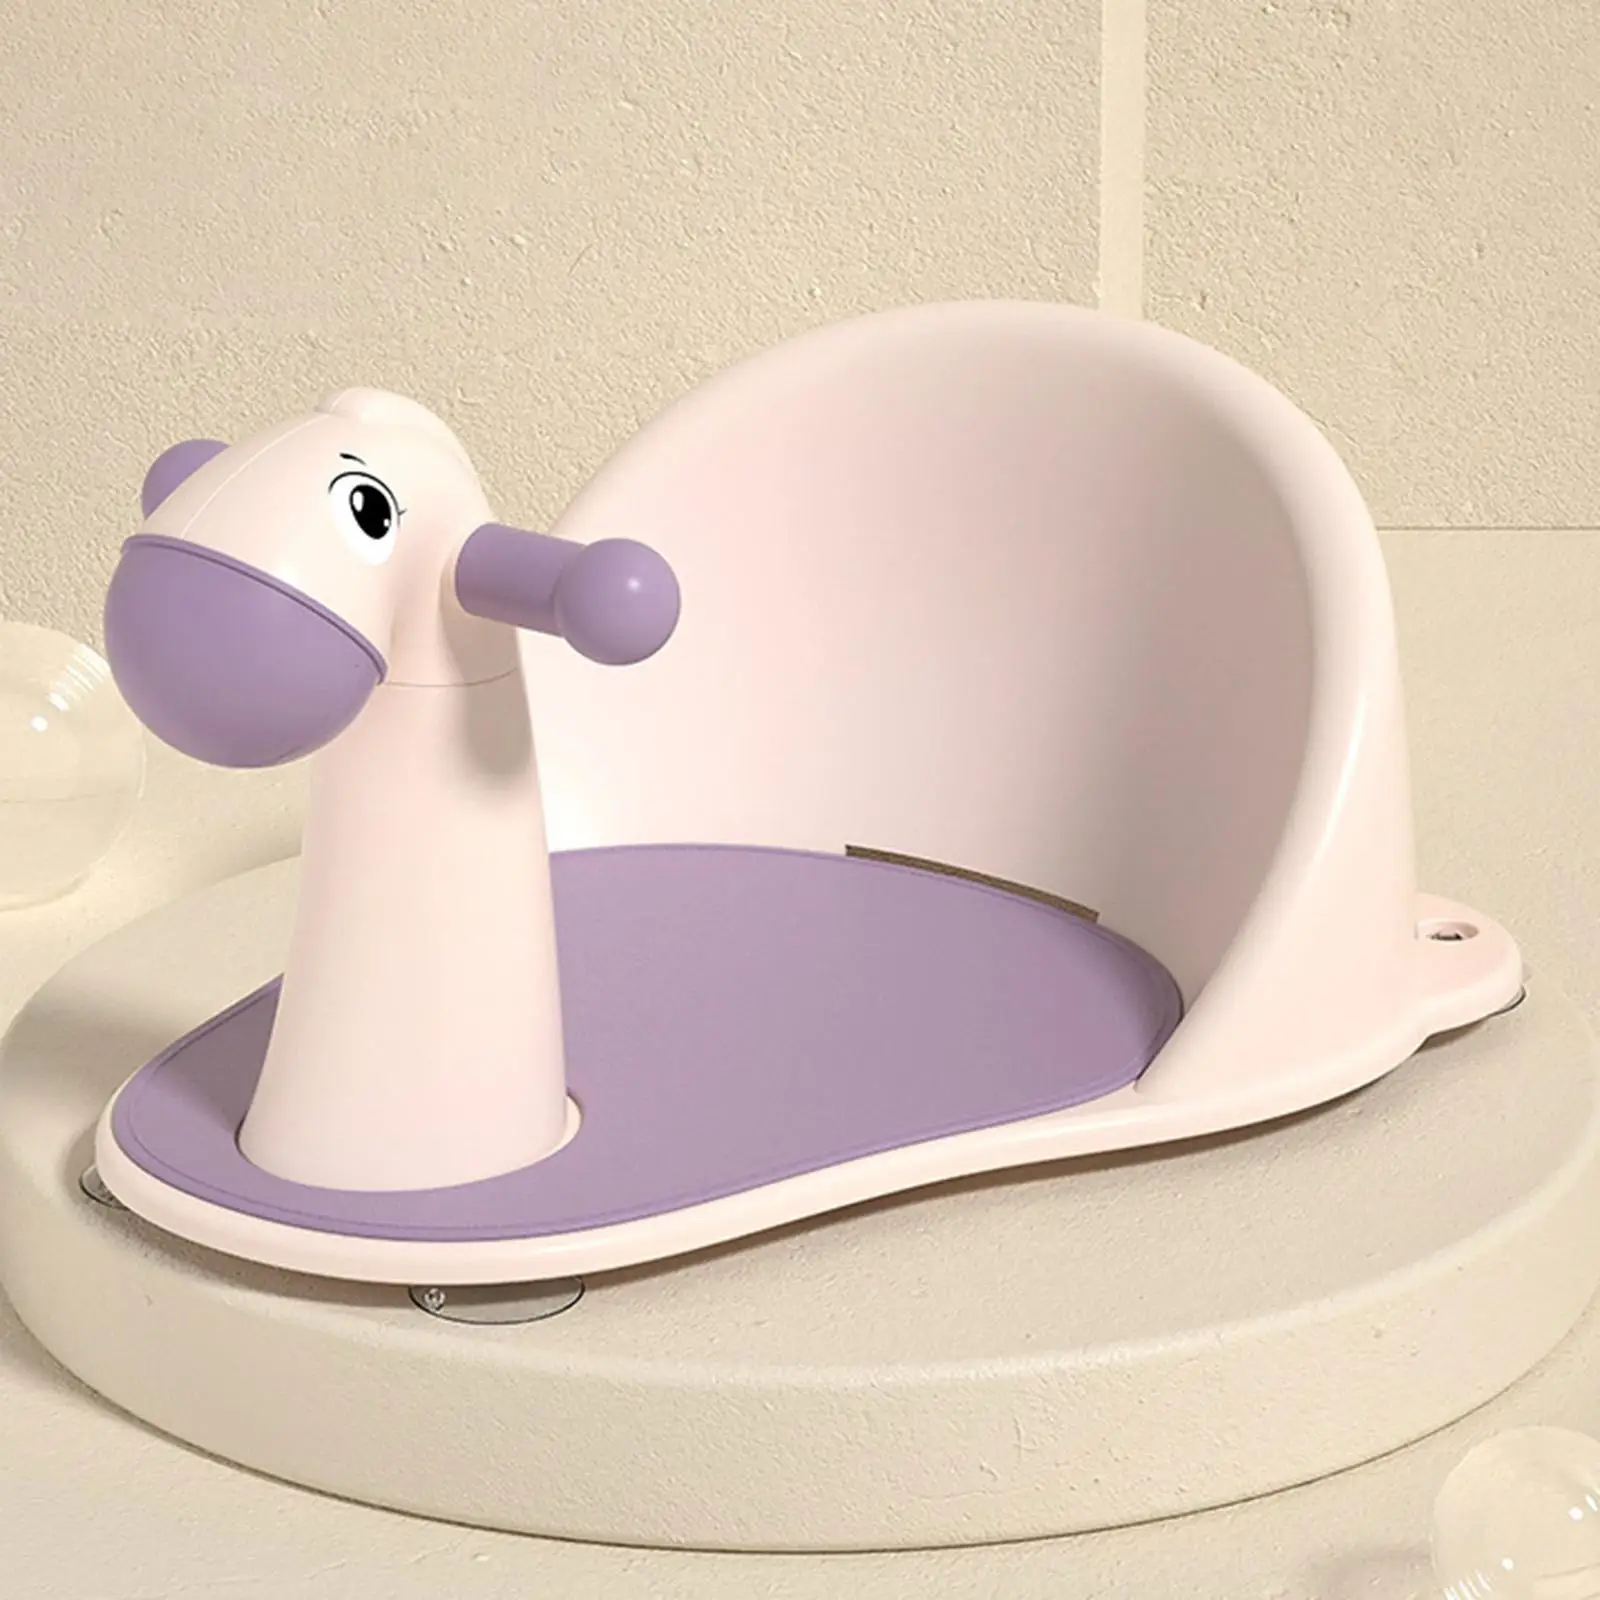 Cute Infants Bath Tub Chair Tub Sitting up Non Slip with Suction Cups Seat for Over 6 Months